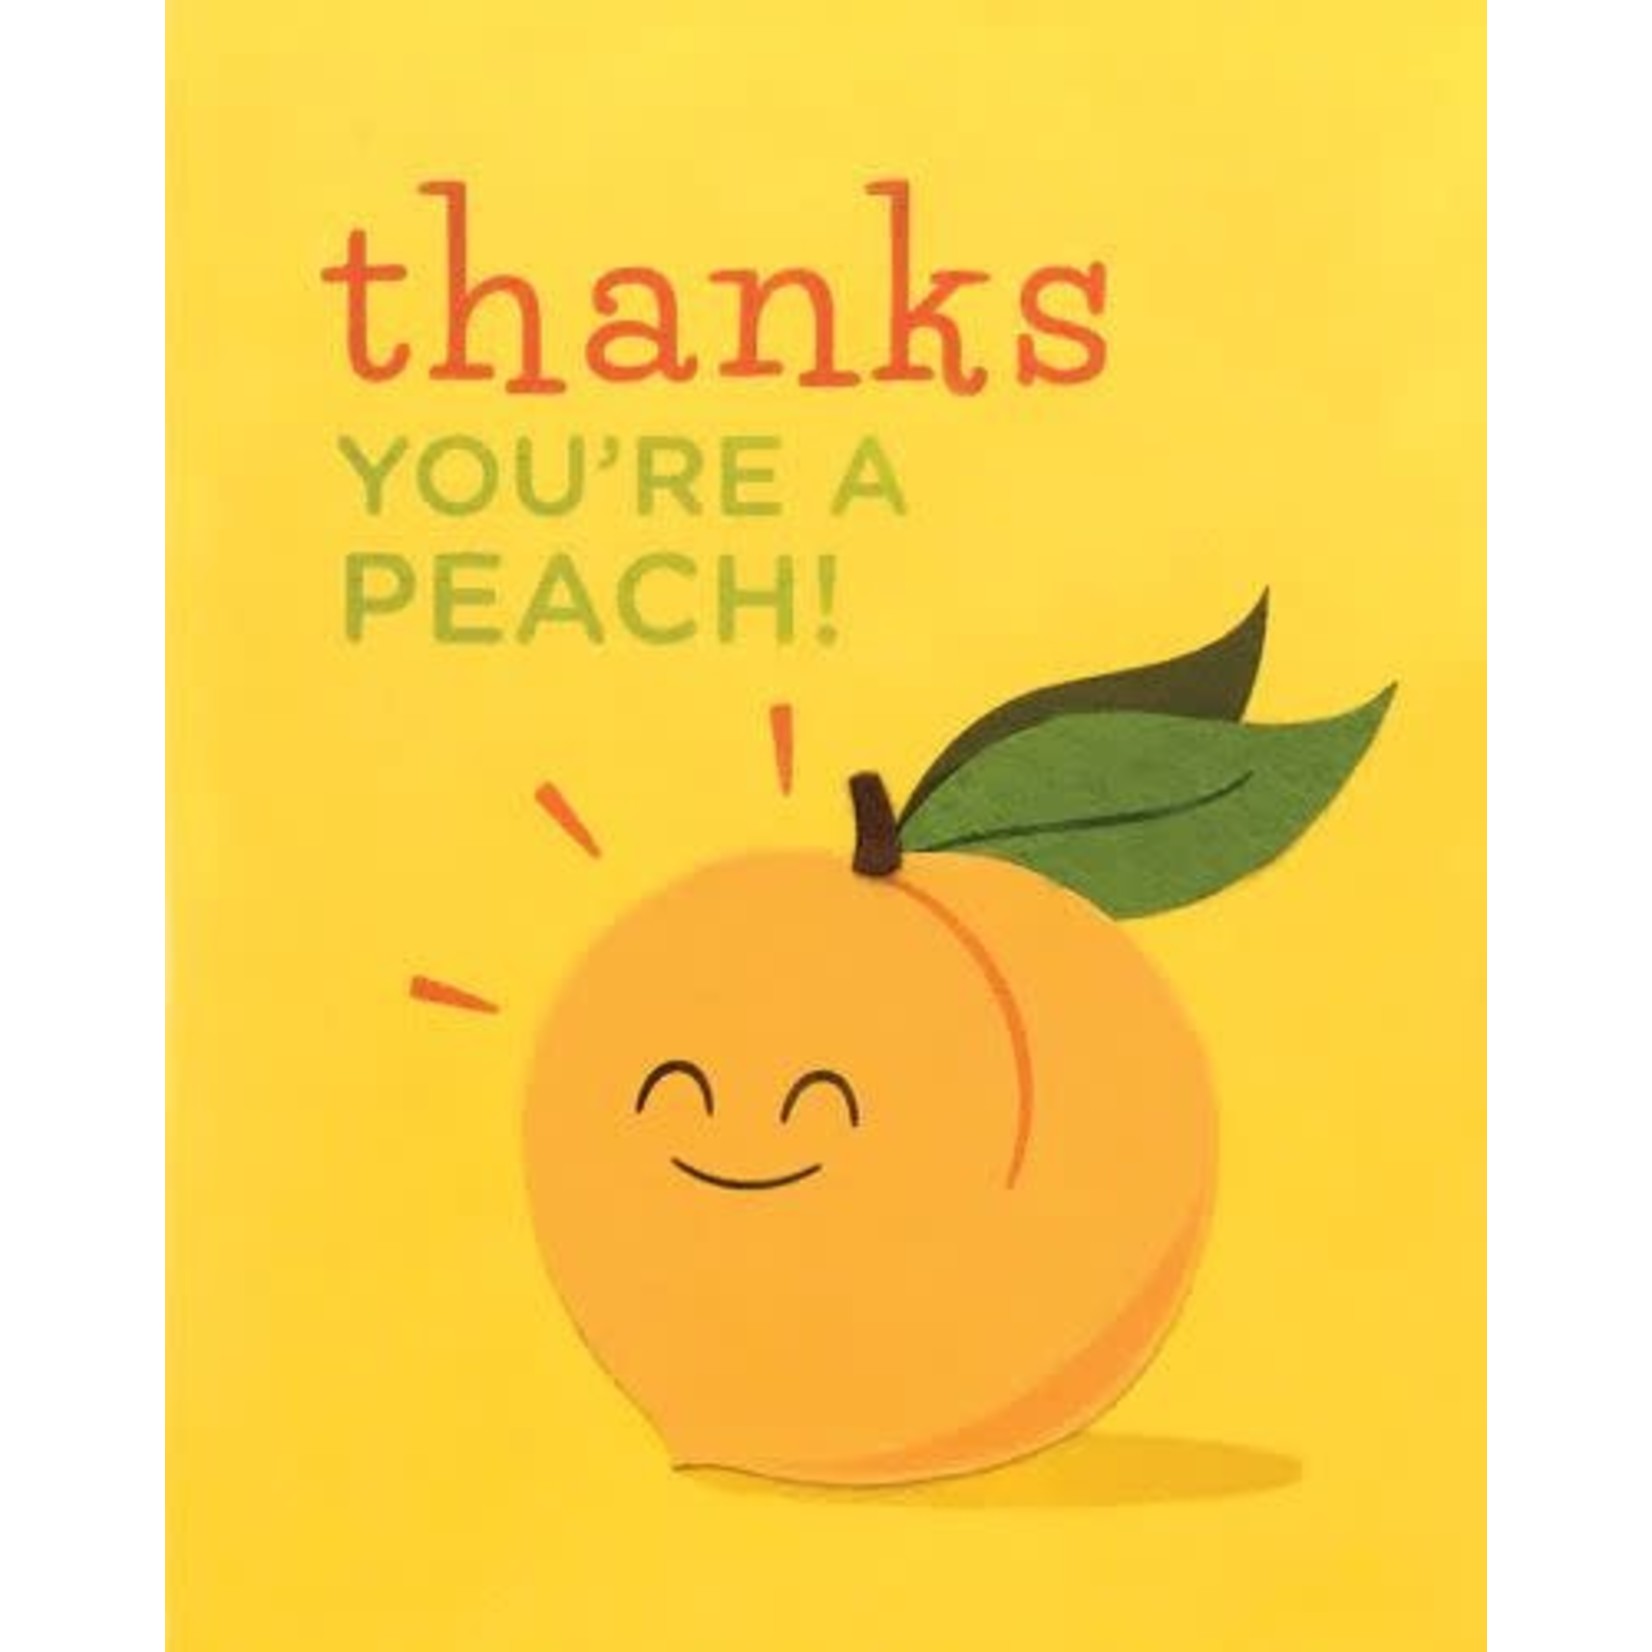 Philippines Thanks You're A Peach Greeting Card